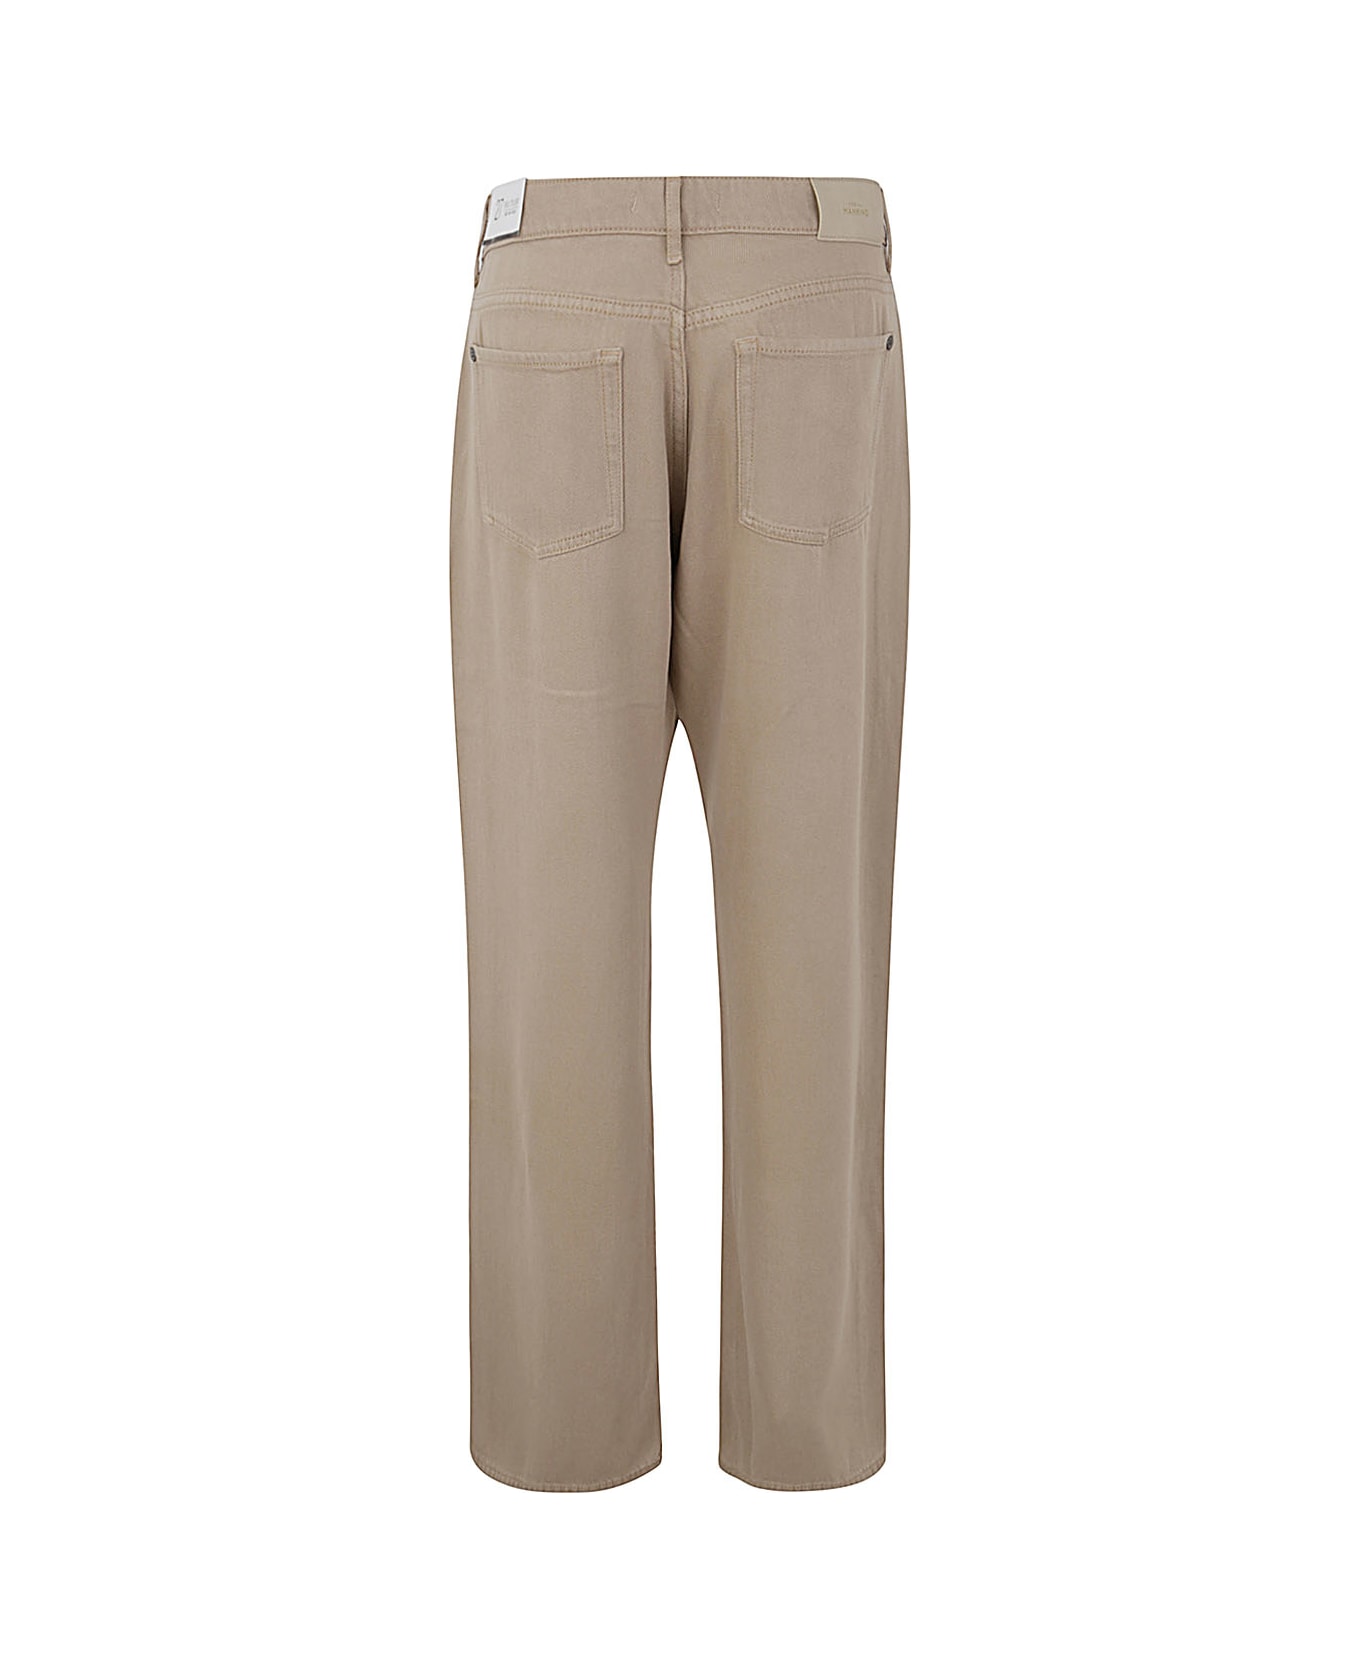 7 For All Mankind Tess Trouser Colored Tencel Sand - Beige ボトムス